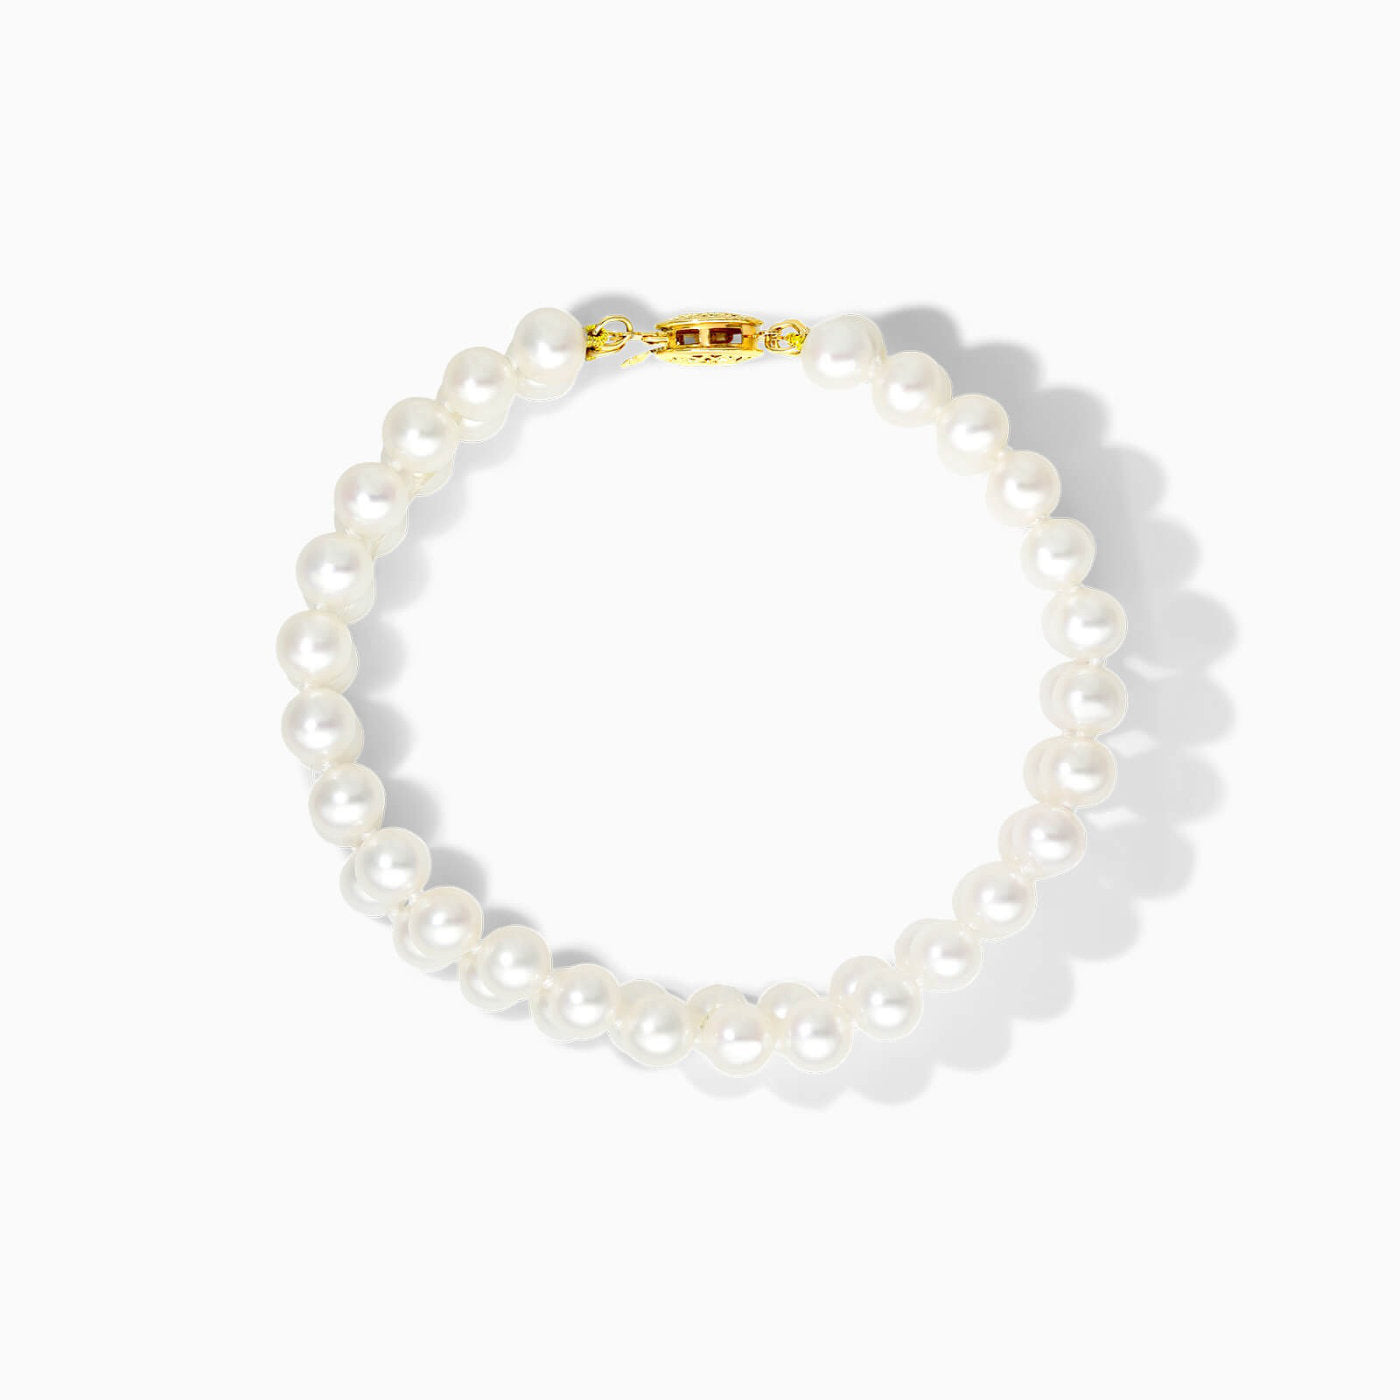 14K Yellow Gold Freshwater Cultured Pearl Double Strand Bracelet from James Allen